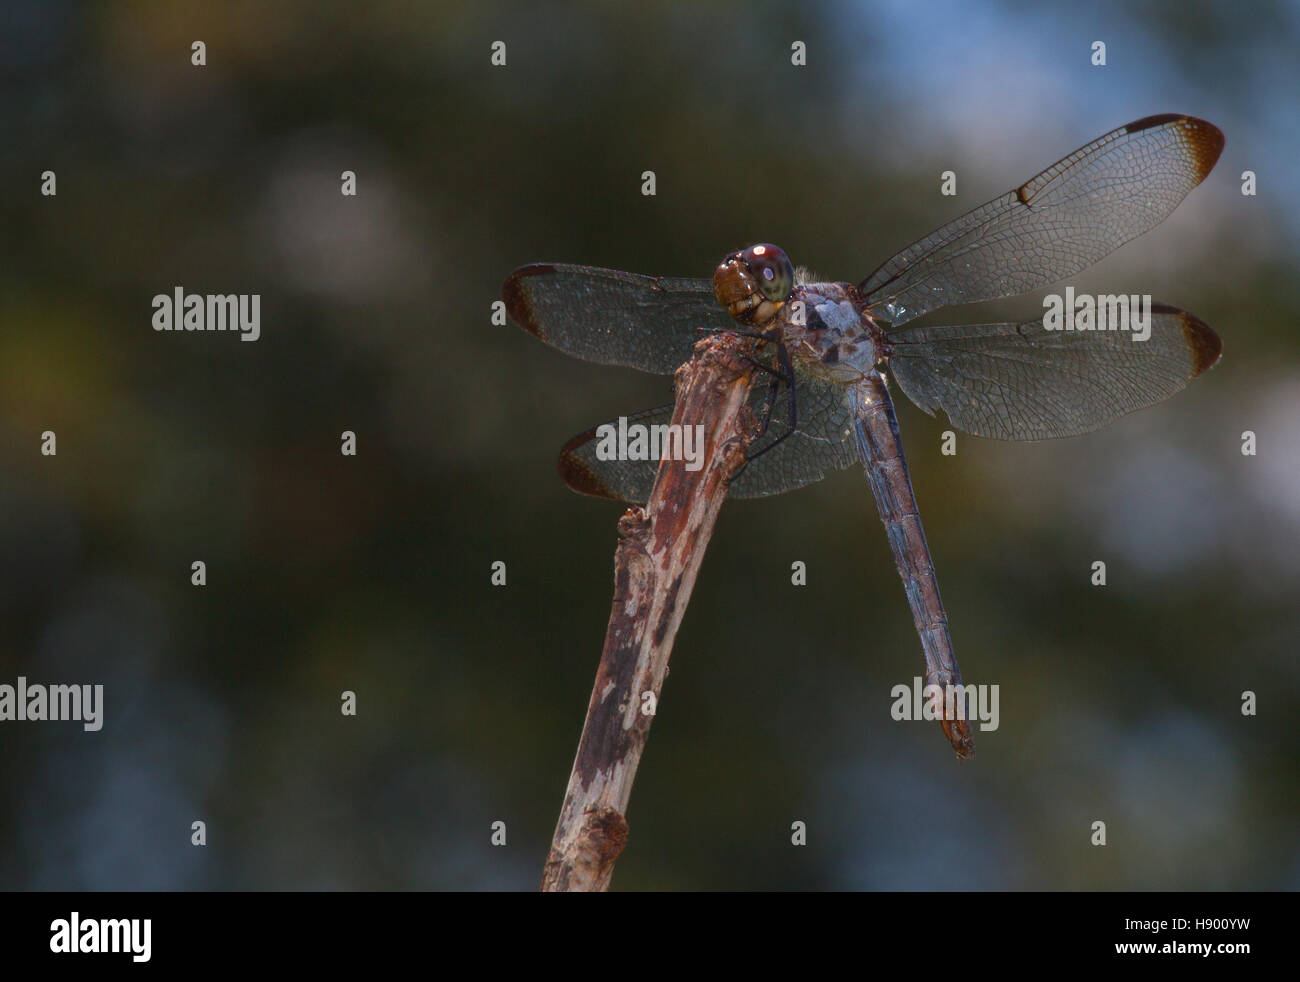 Dragonfly resting on a stick with out of focus trees behind Stock Photo